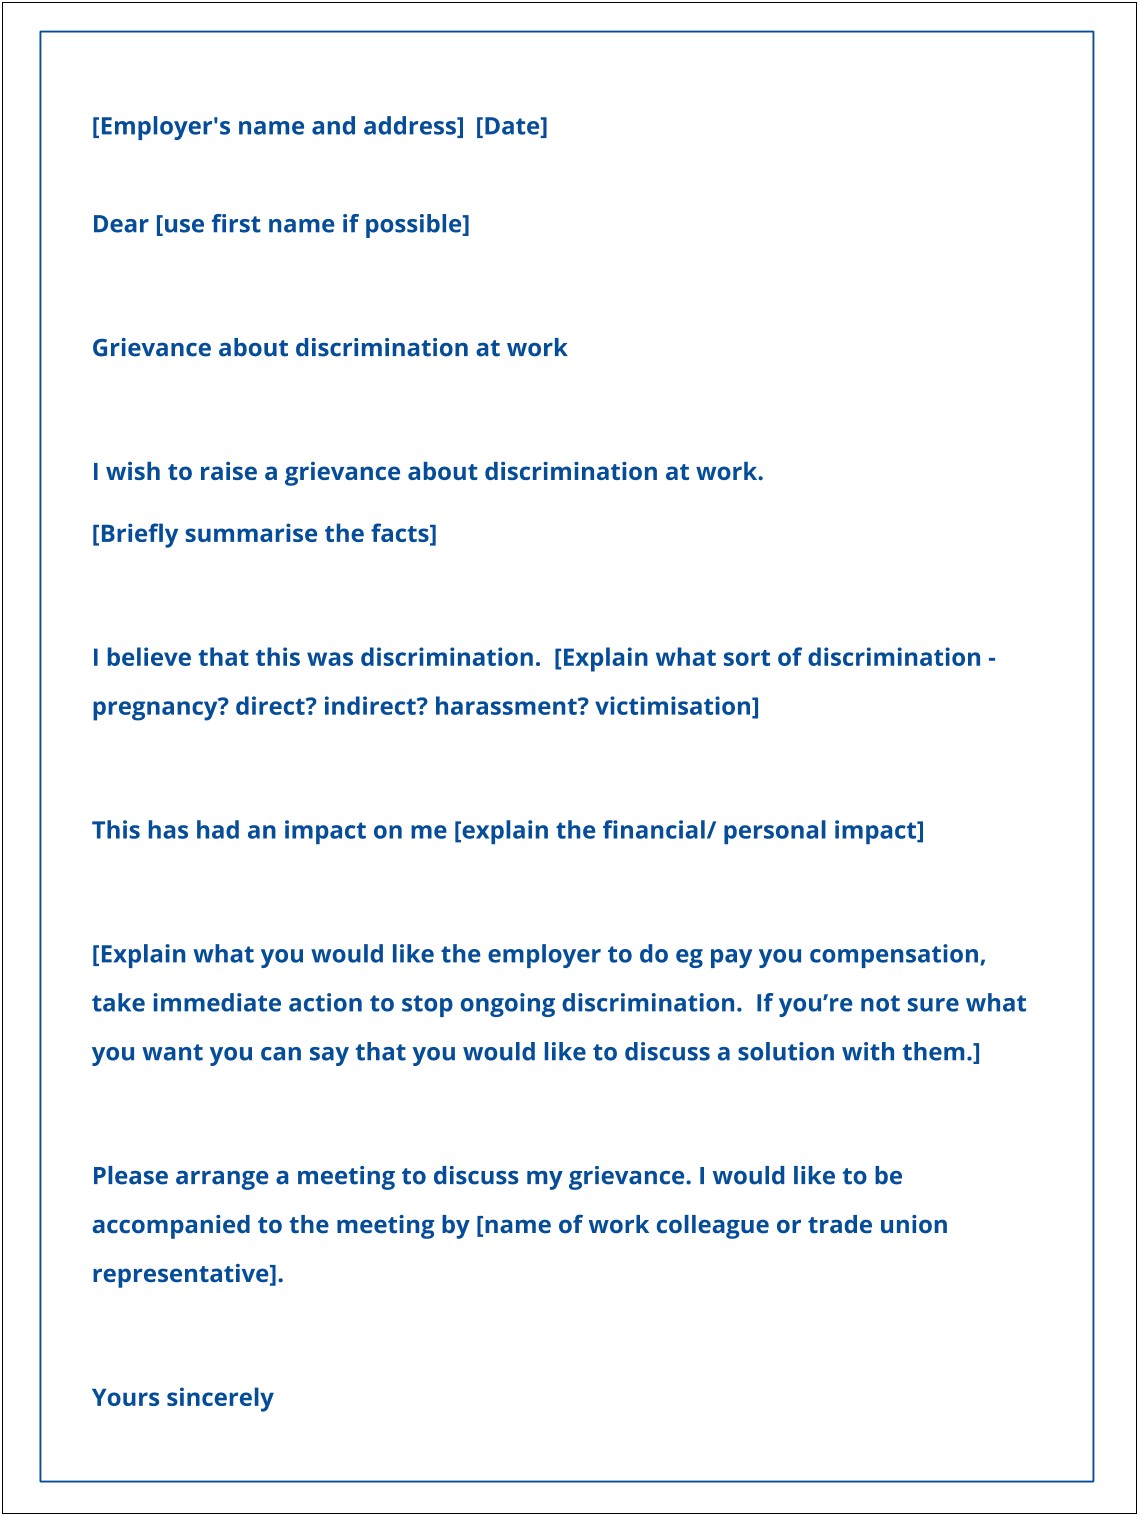 Grievance Outcome Letter Bullying Workplace Template